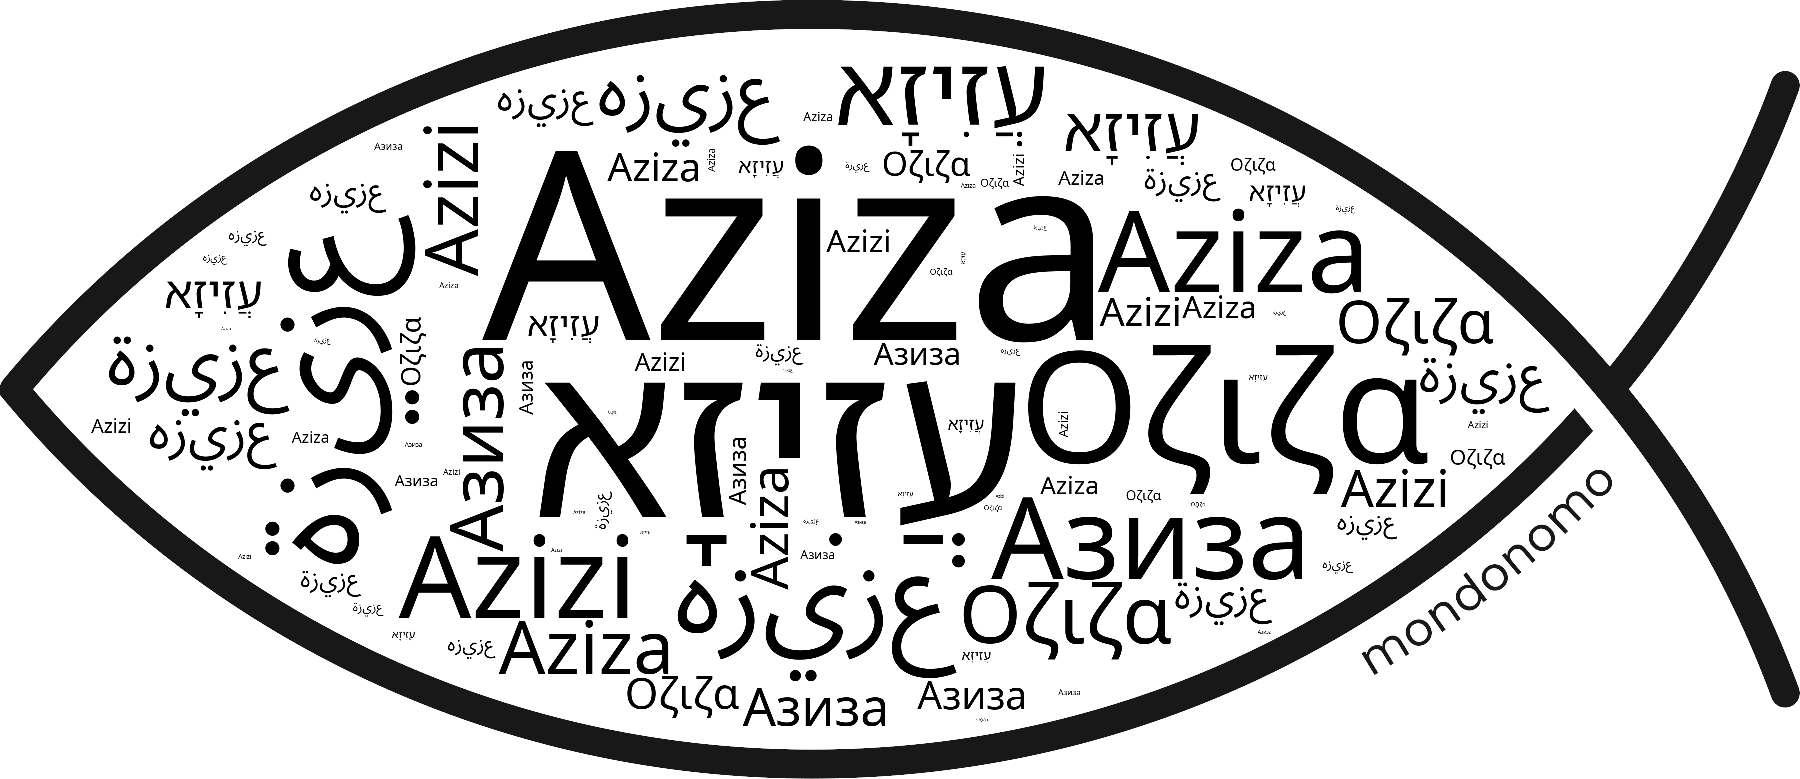 Name Aziza in the world's Bibles